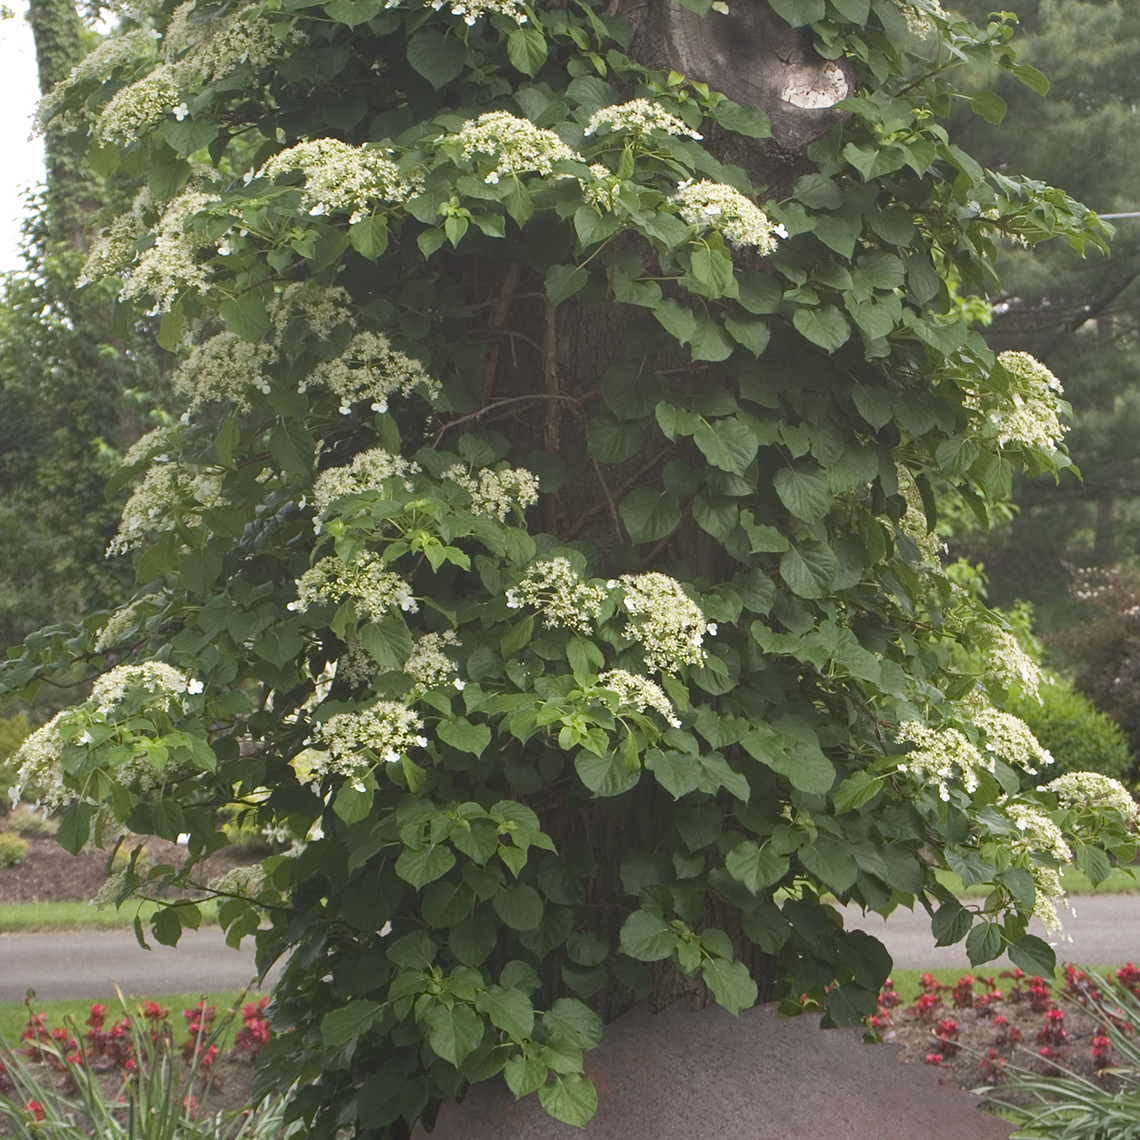 Skyland Giant climbing hydrangea ascending a tree with many white lacecap blooms